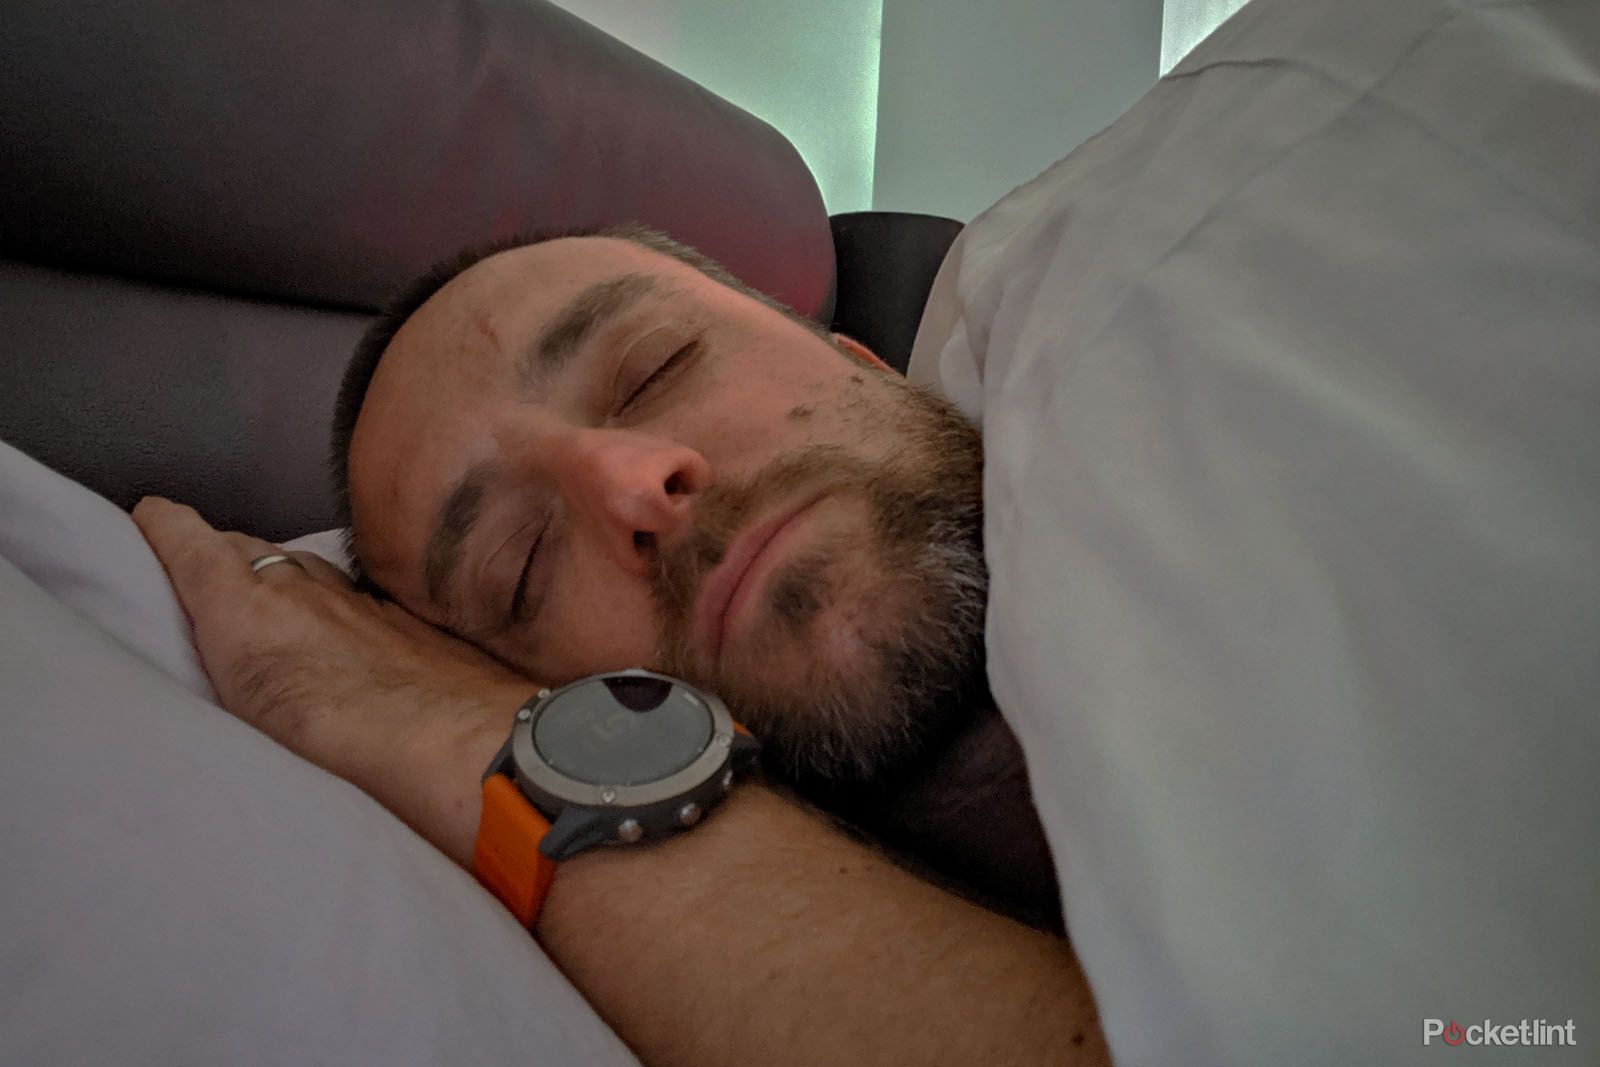 Garmin and others should just make a sleep tracker to help me rest in peace image 1